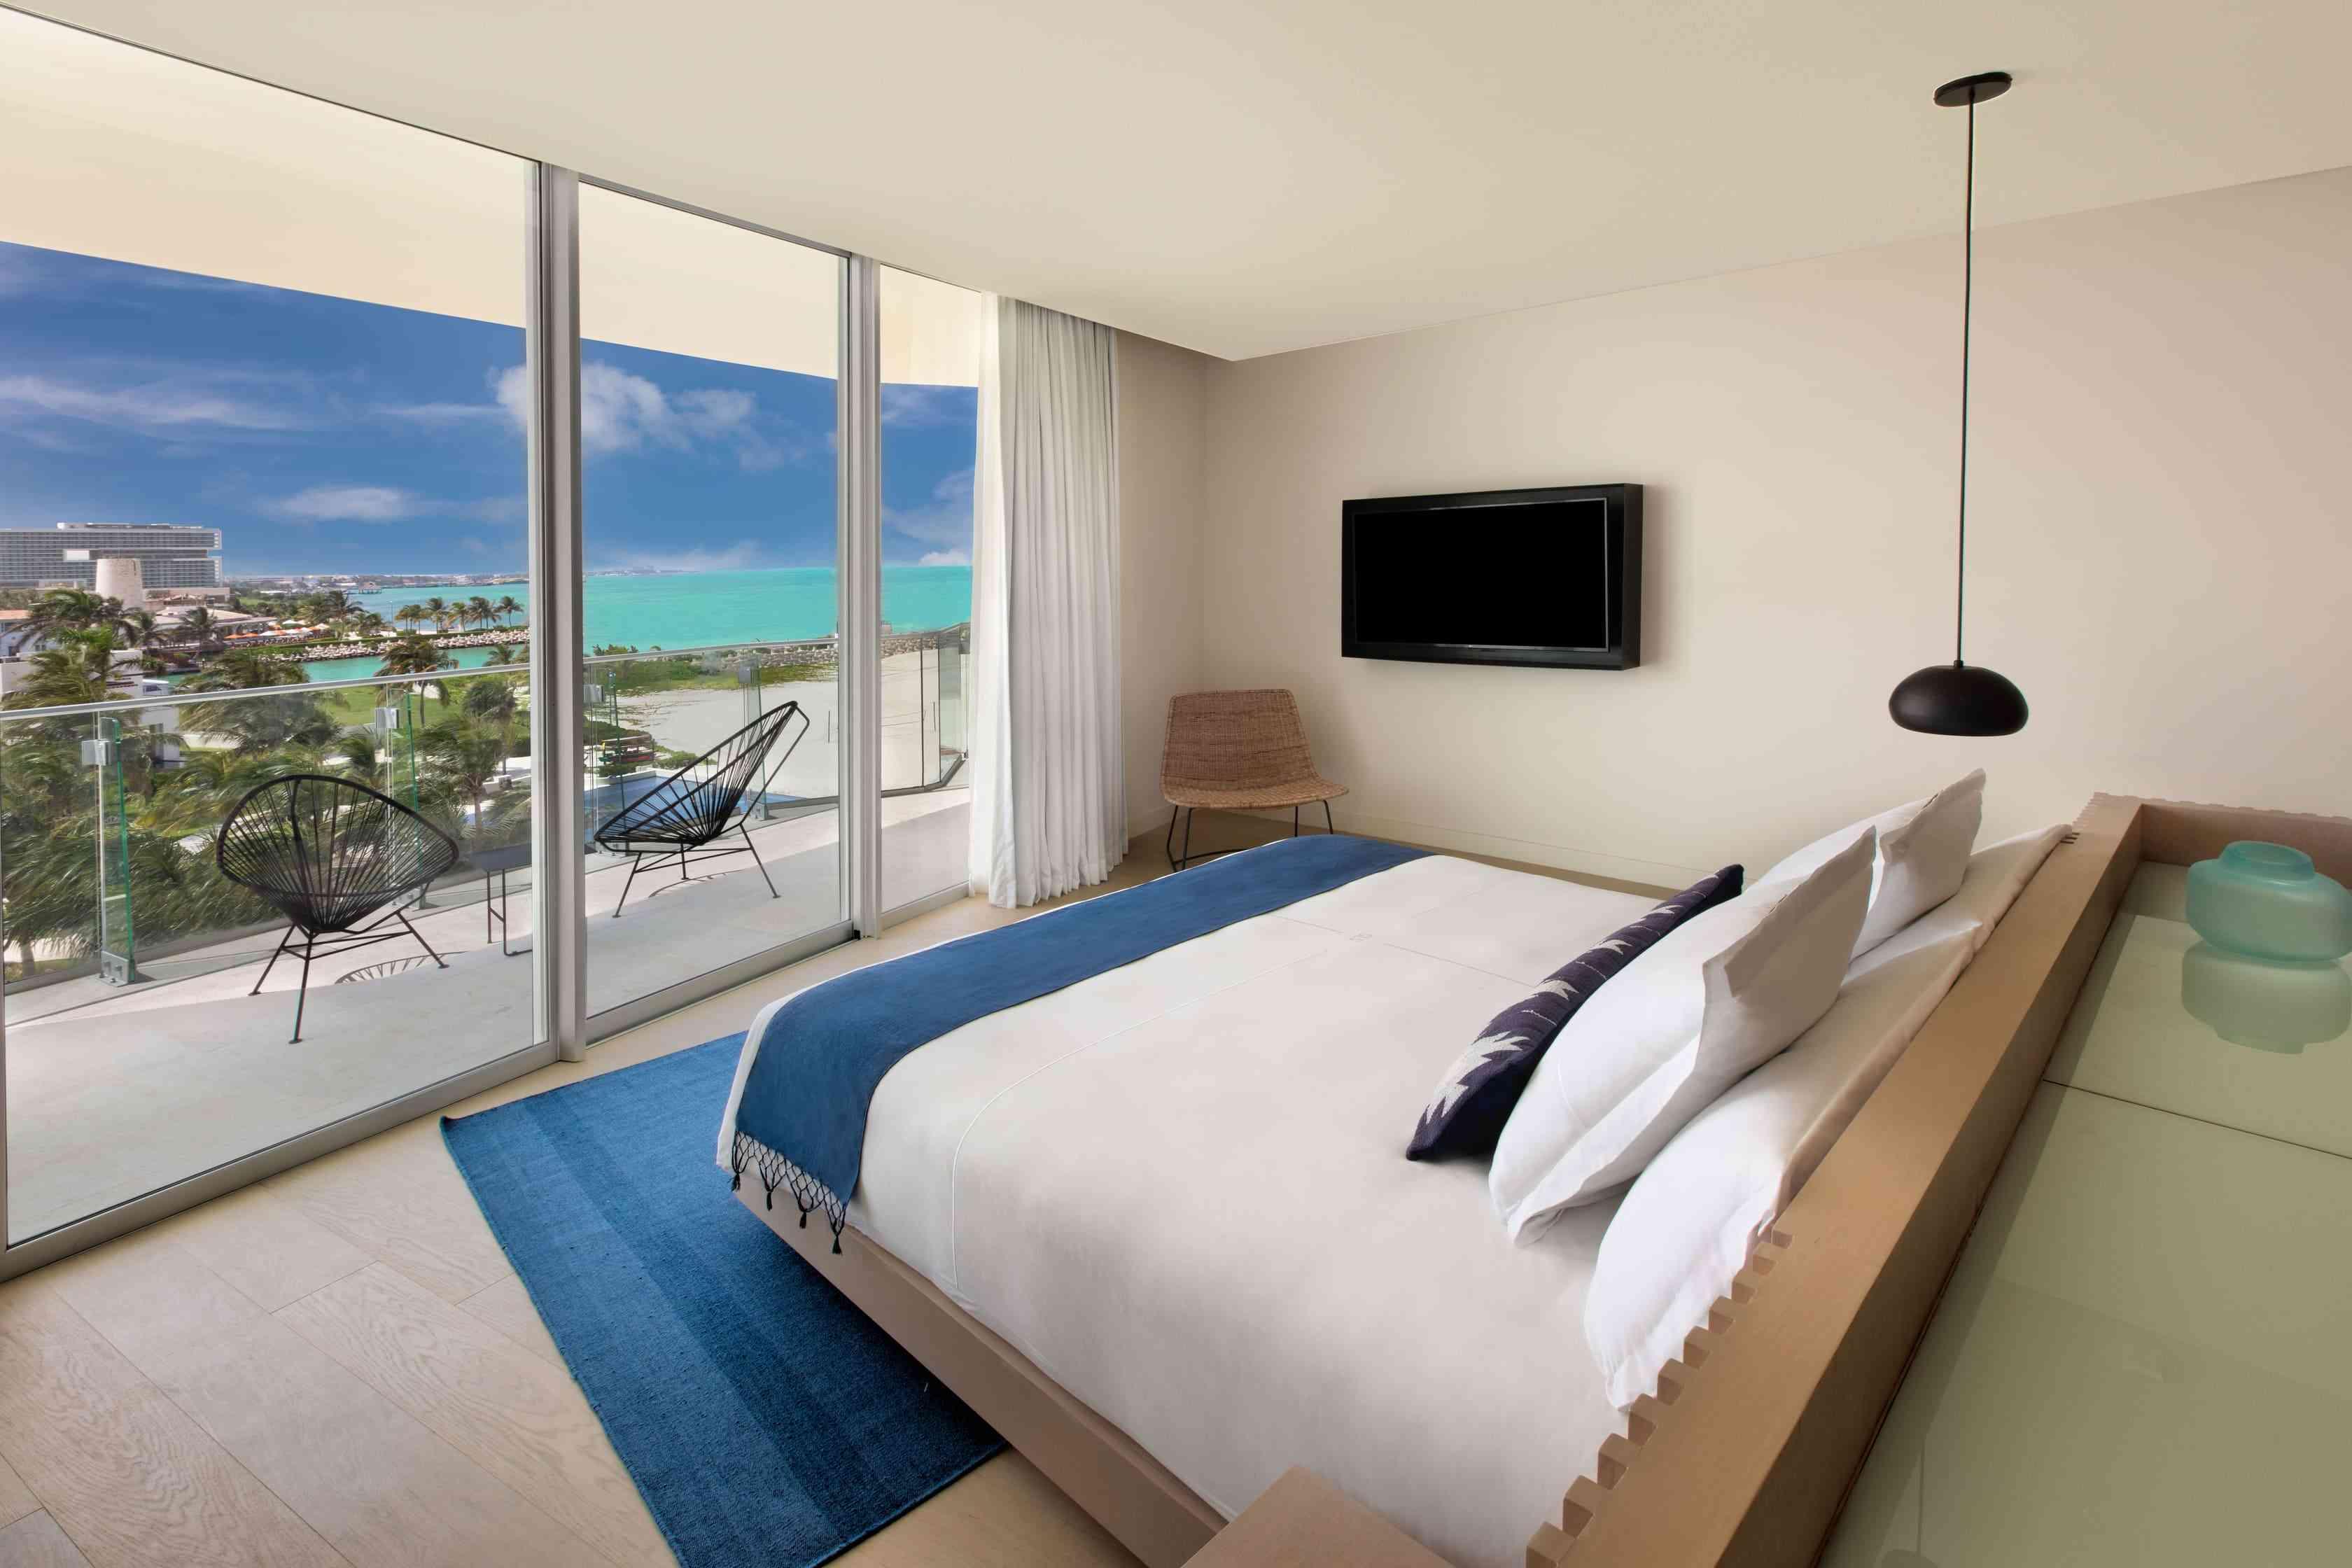 Bedroom with bed facing the balcony which overlooks the ocean